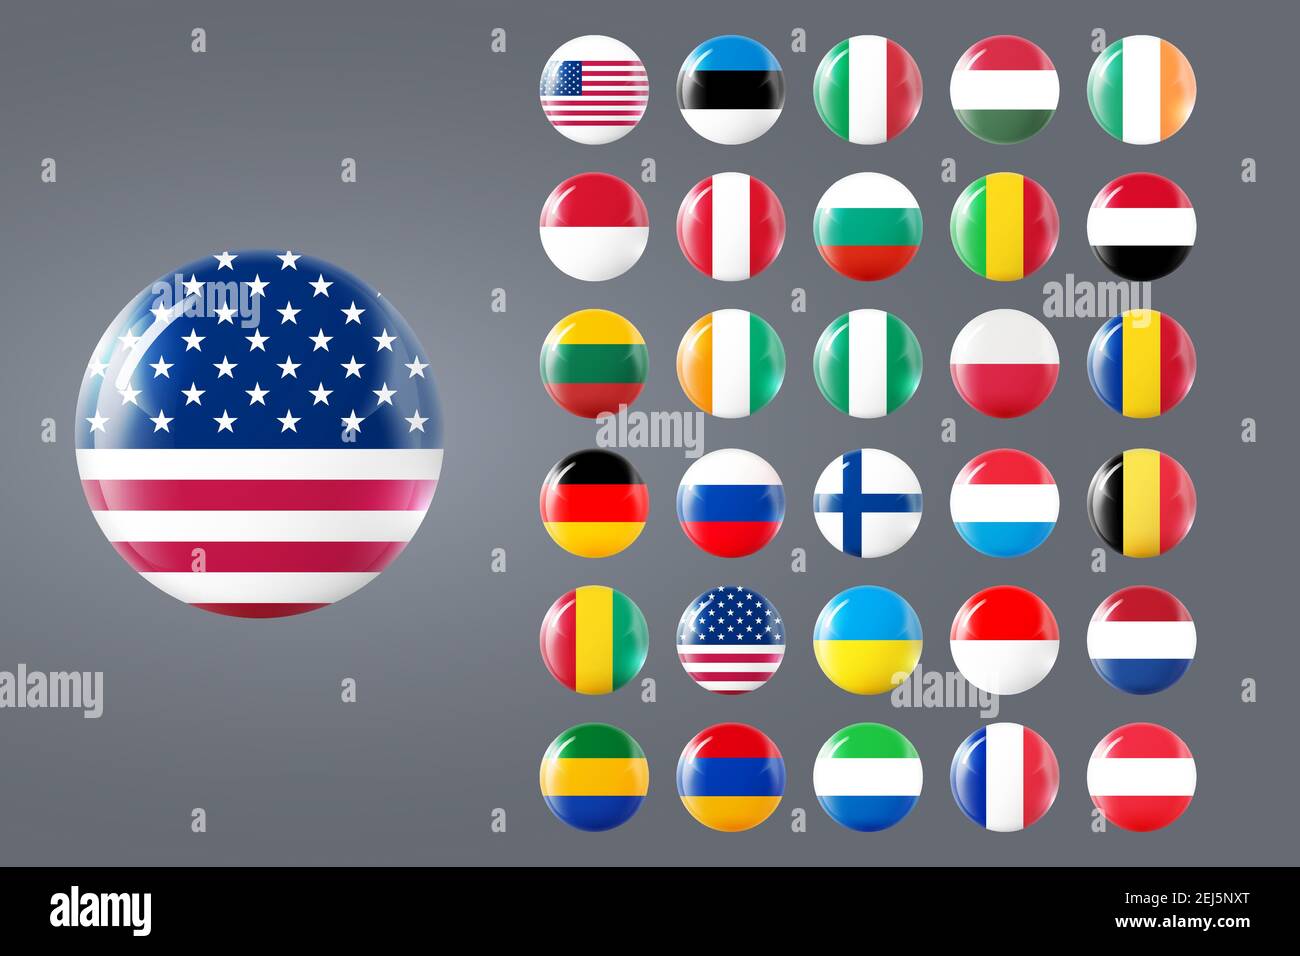 1,248 All Official Flags Country Shape Images, Stock Photos, 3D objects, &  Vectors